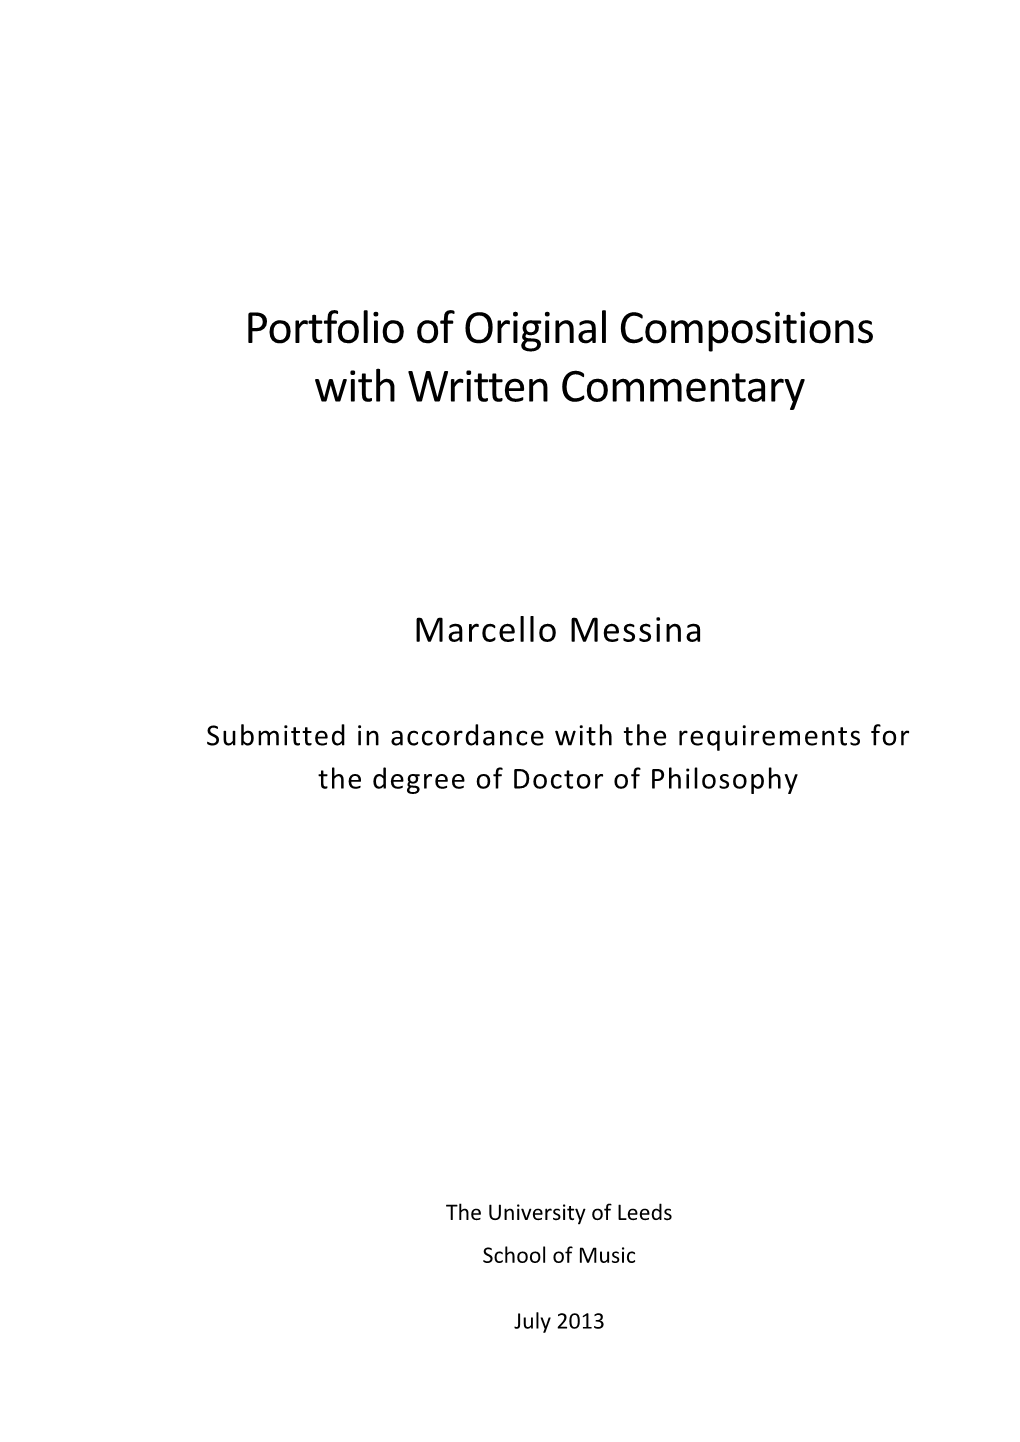 Portfolio of Original Compositions with Written Commentary